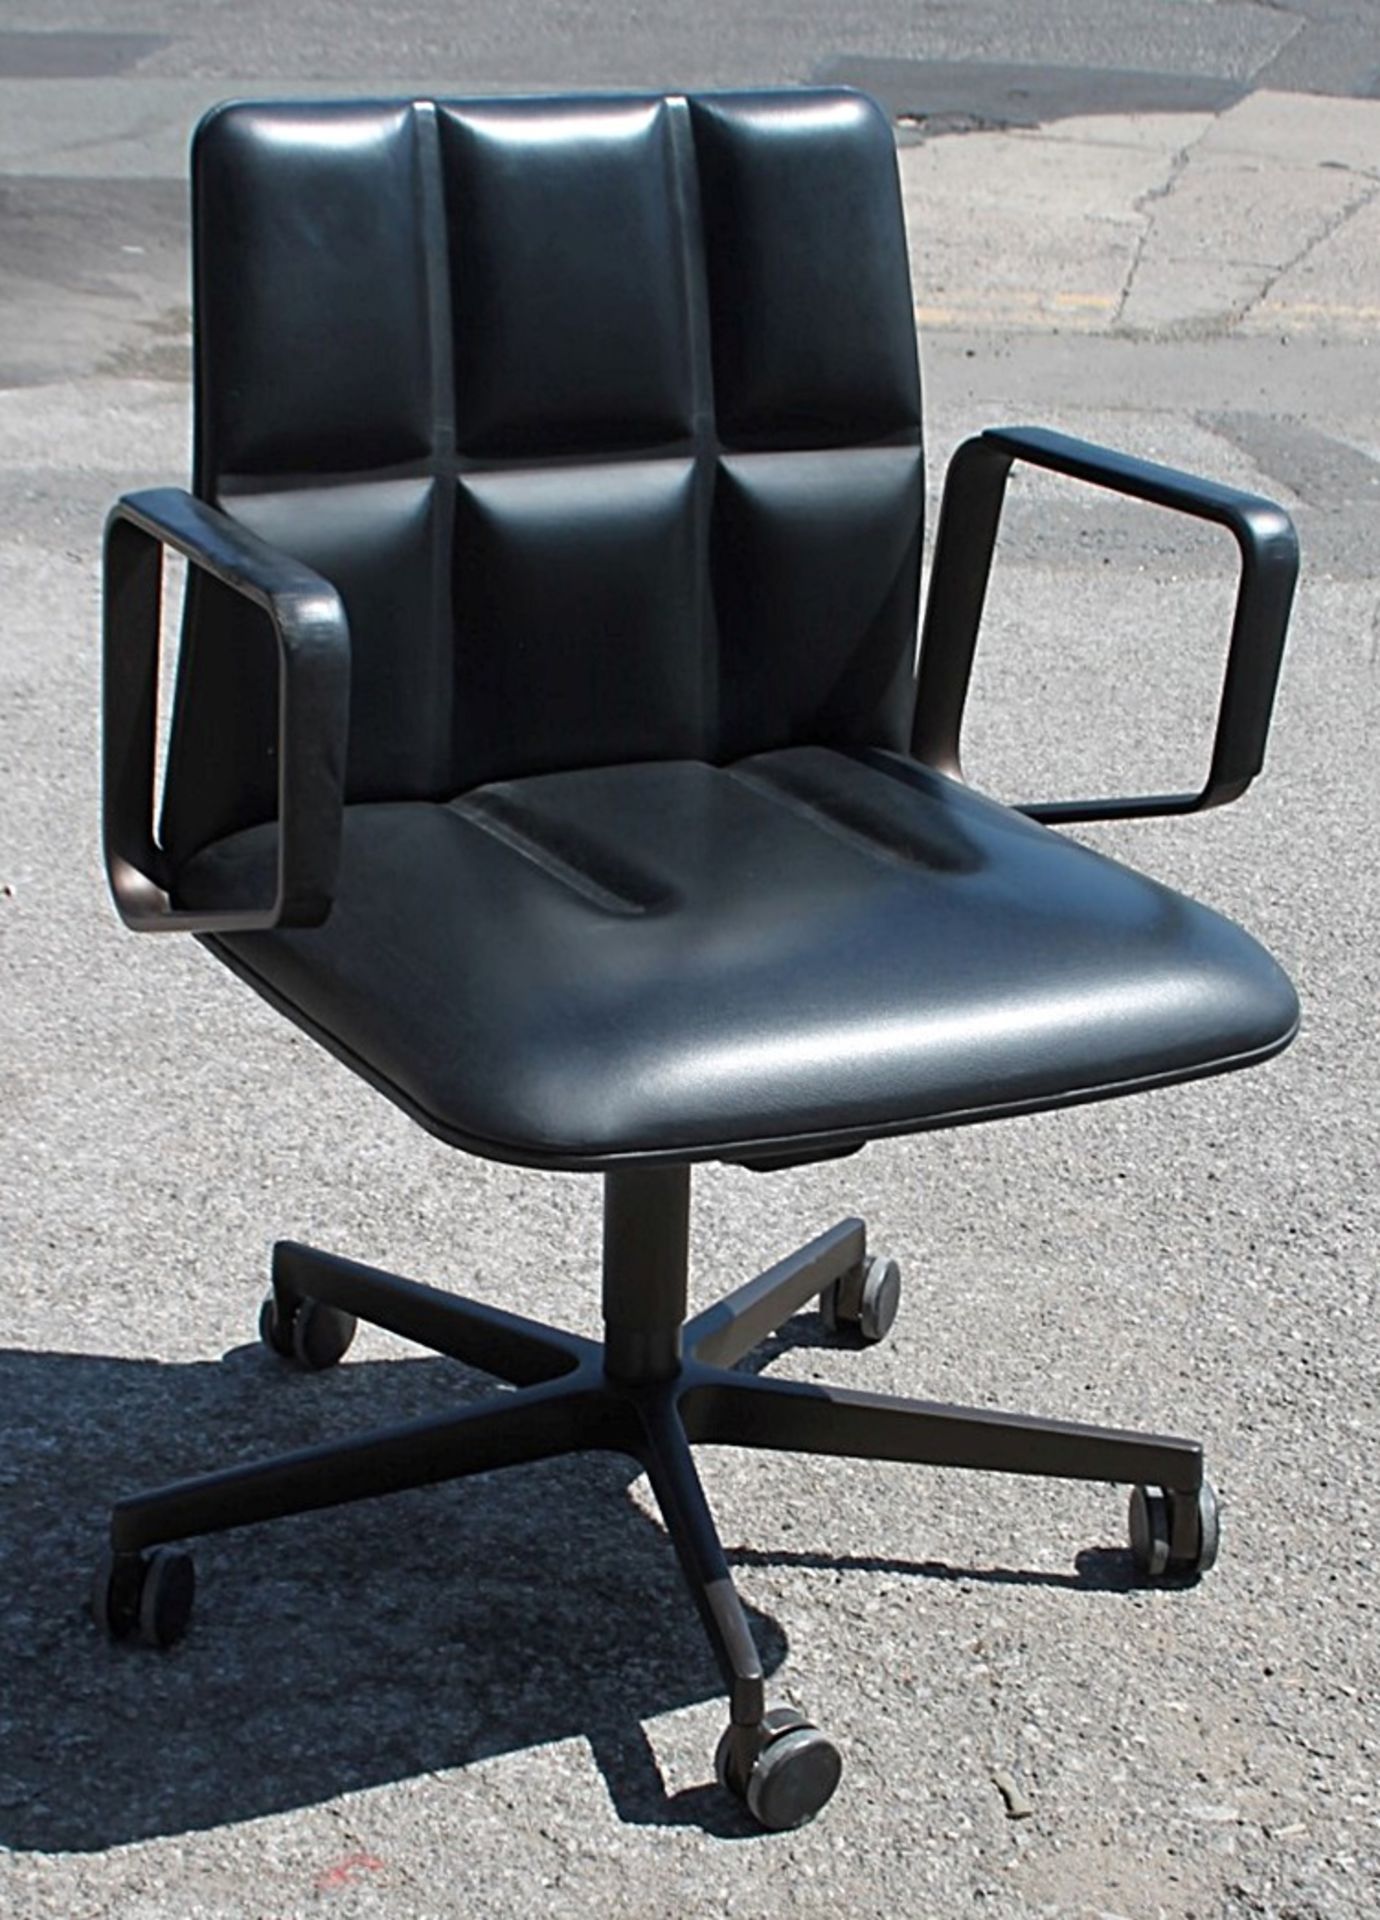 1 x WALTER KNOLL 'Leadchair' Executive Meeting Chair In Genuine Leather - Original RRP £4,250